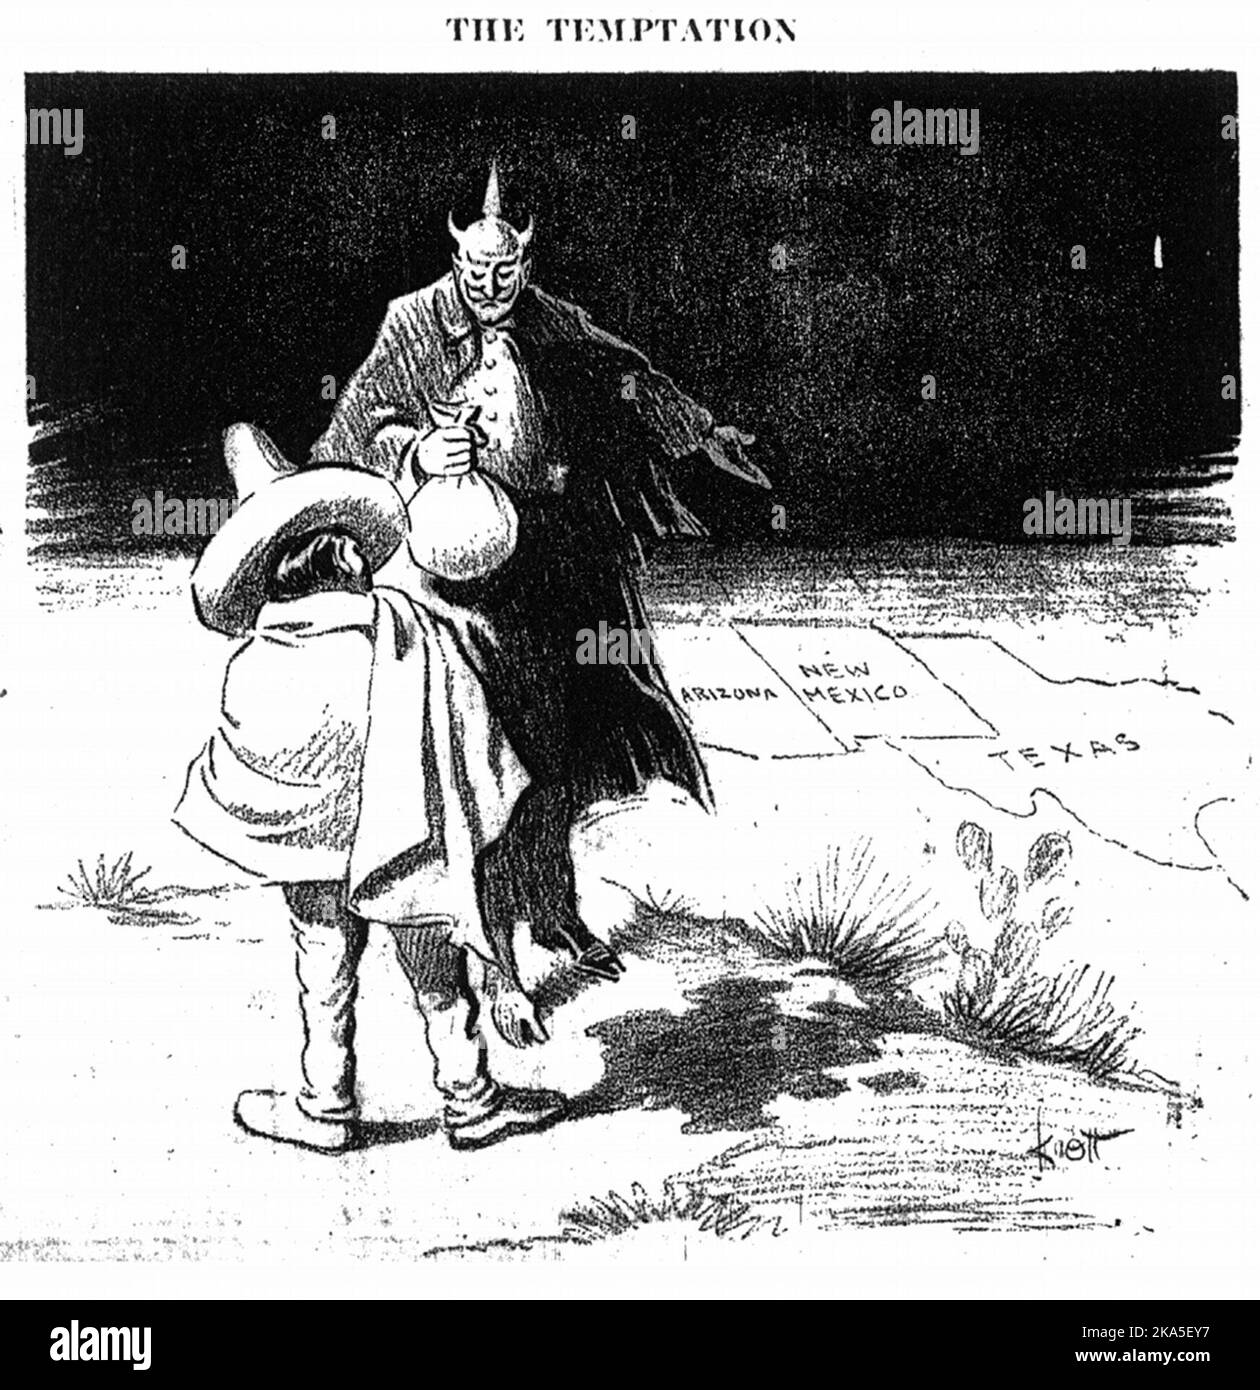 A political cartoon from Dallas Morning News 2 March 1917. Iy shows the devil dressed as a German offering 3 southwestern states to Mexico if it joins a war against USA. This was published in response the explosive Zimmerman telegram, is which Germany offered Mexico land in Arizona, Texas and New Mexico in return for Mexican help in a war against the USA during WW1 Stock Photo